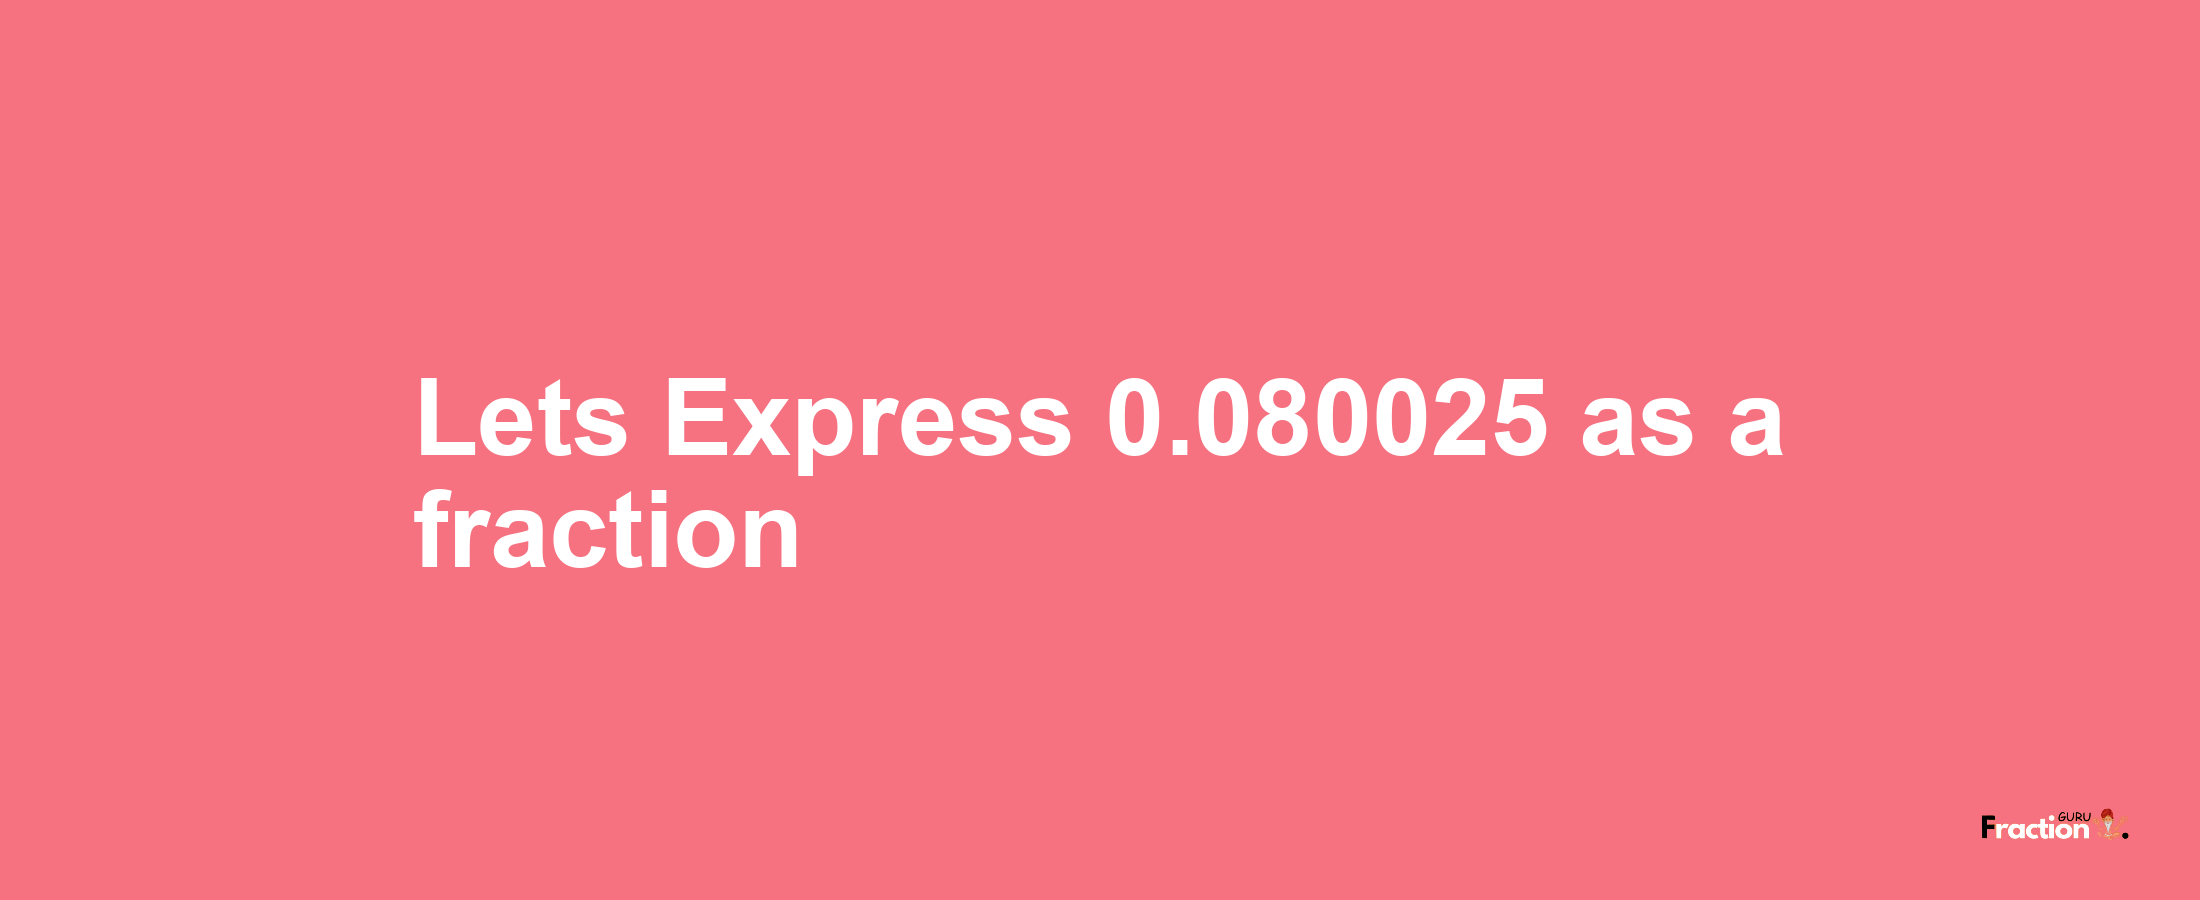 Lets Express 0.080025 as afraction